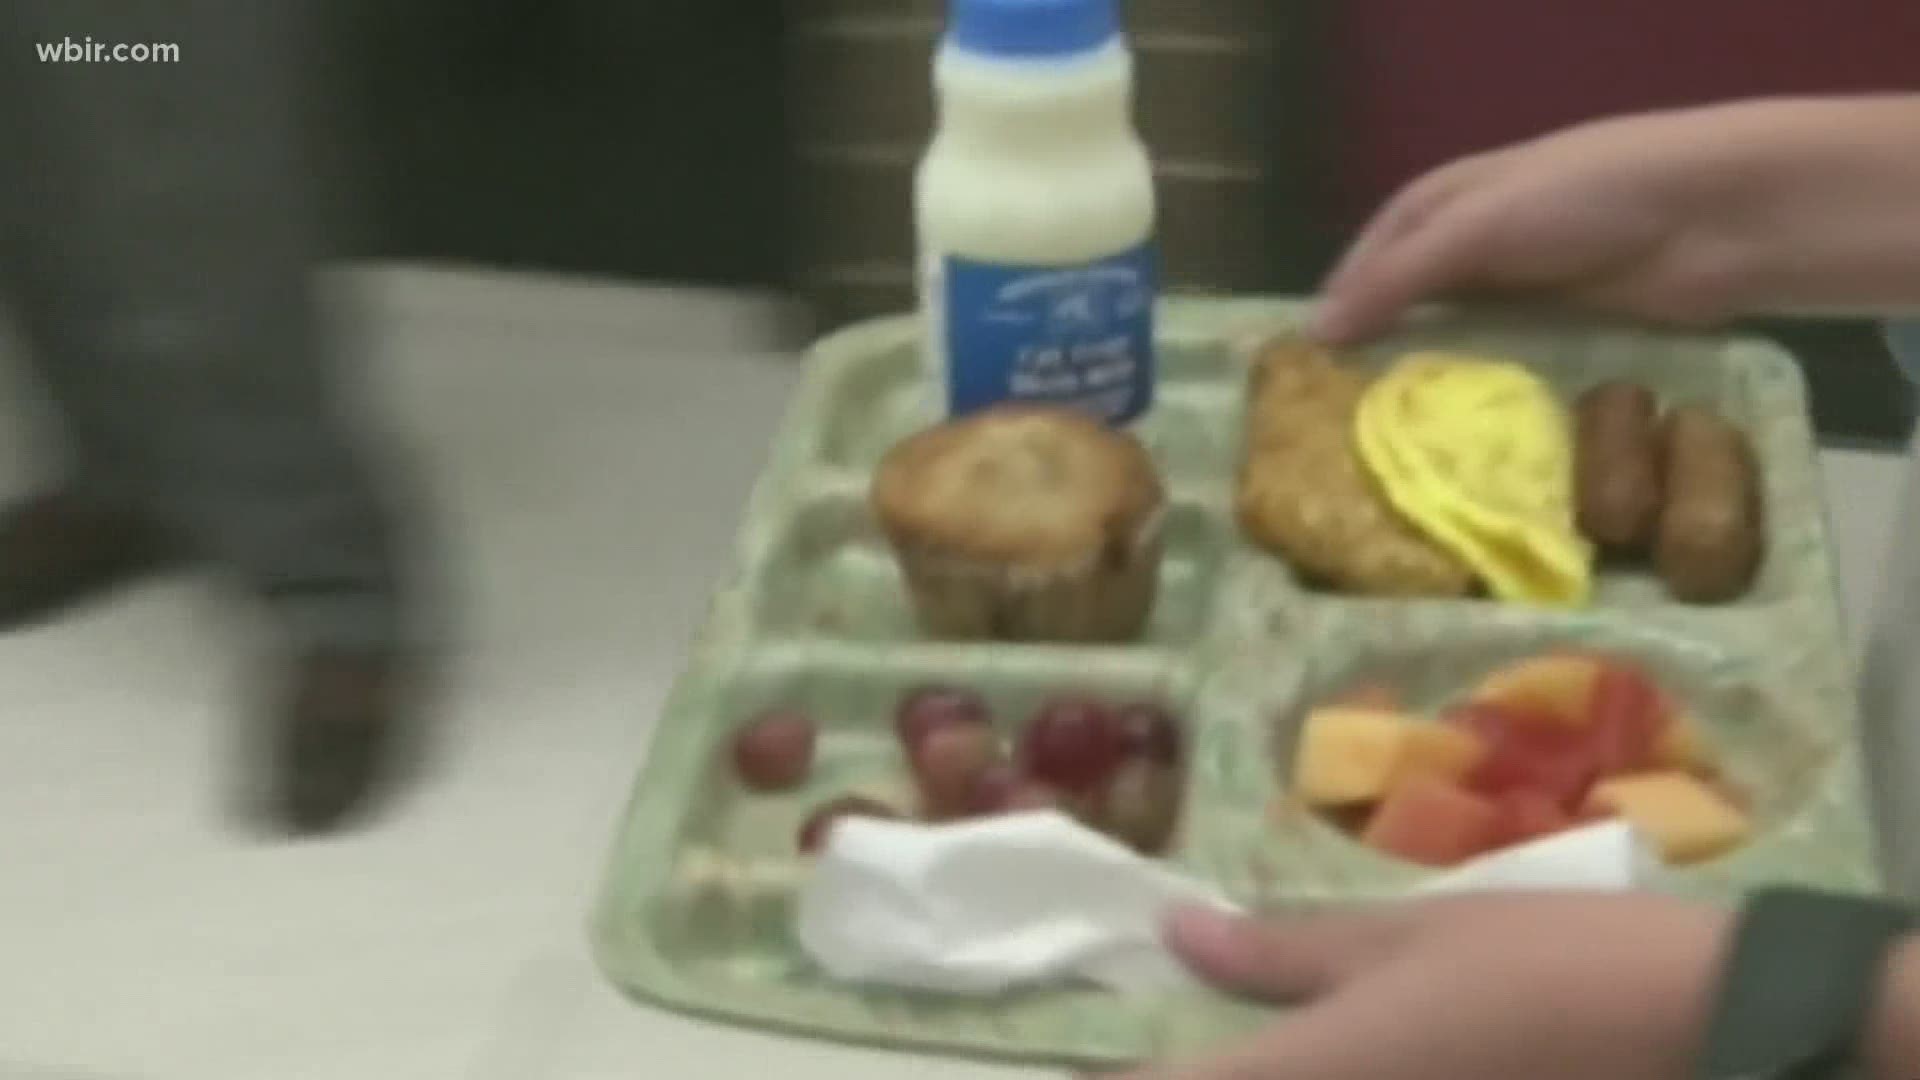 Knox County Schools said students will continue to eat breakfast and lunch at no cost for the next school year.